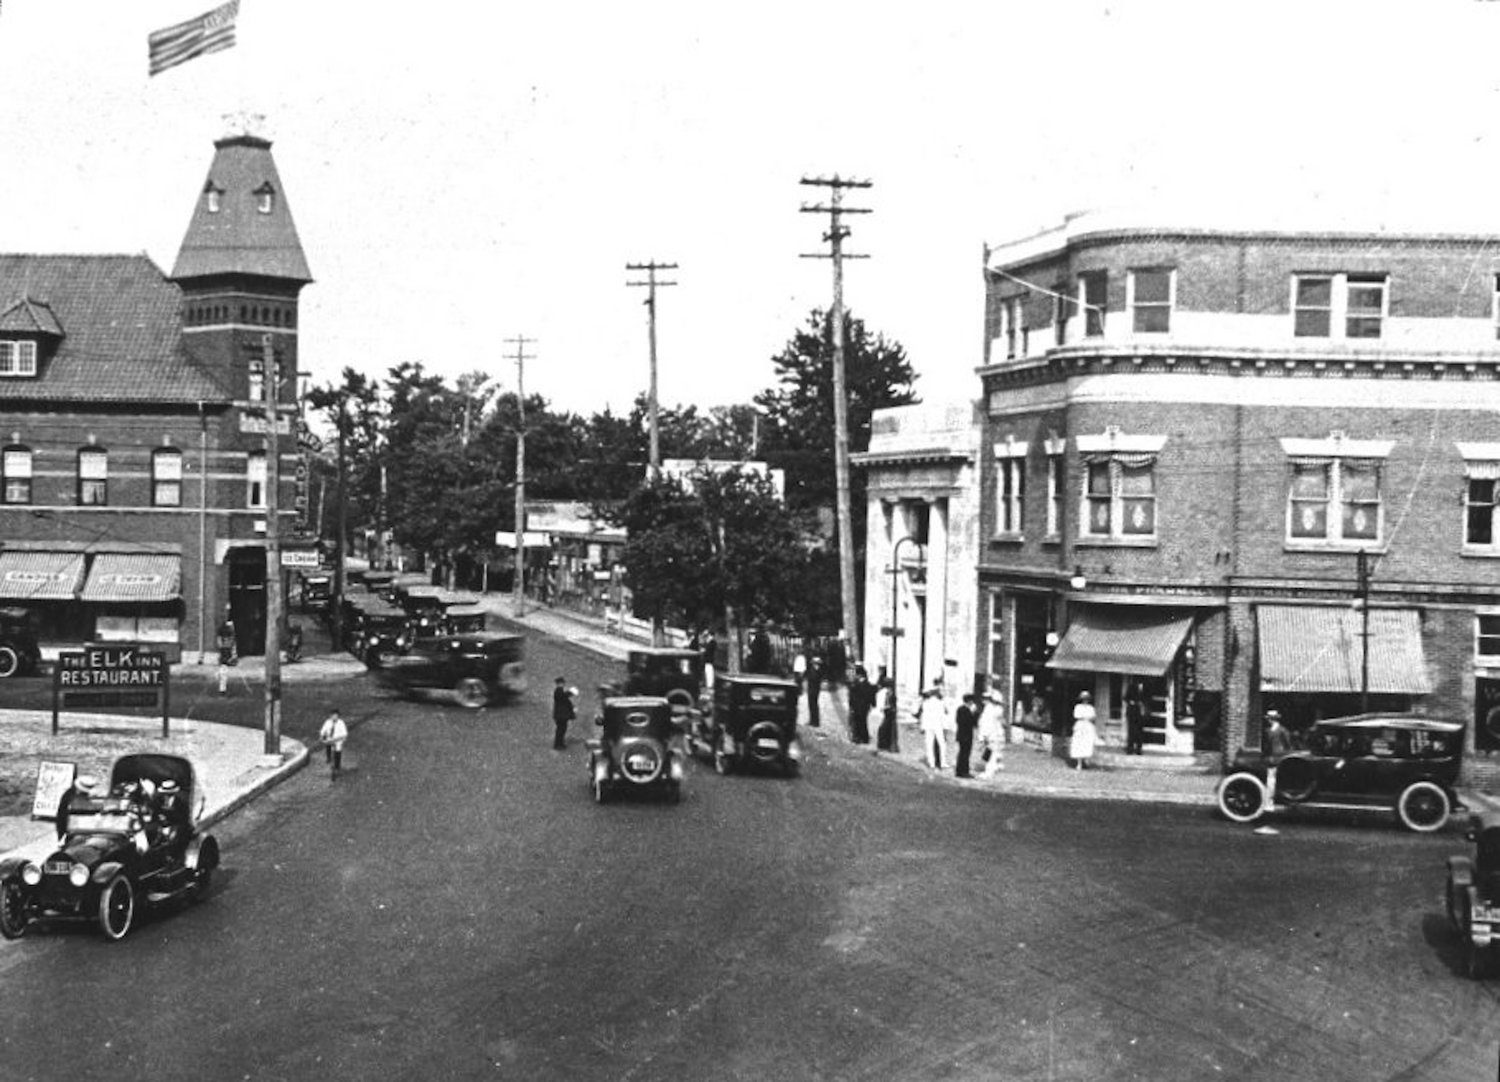 This view looks east down Merrick Road, with “Shorty the Cop” running the show. The photo is from 1925, the year before lightning struck.